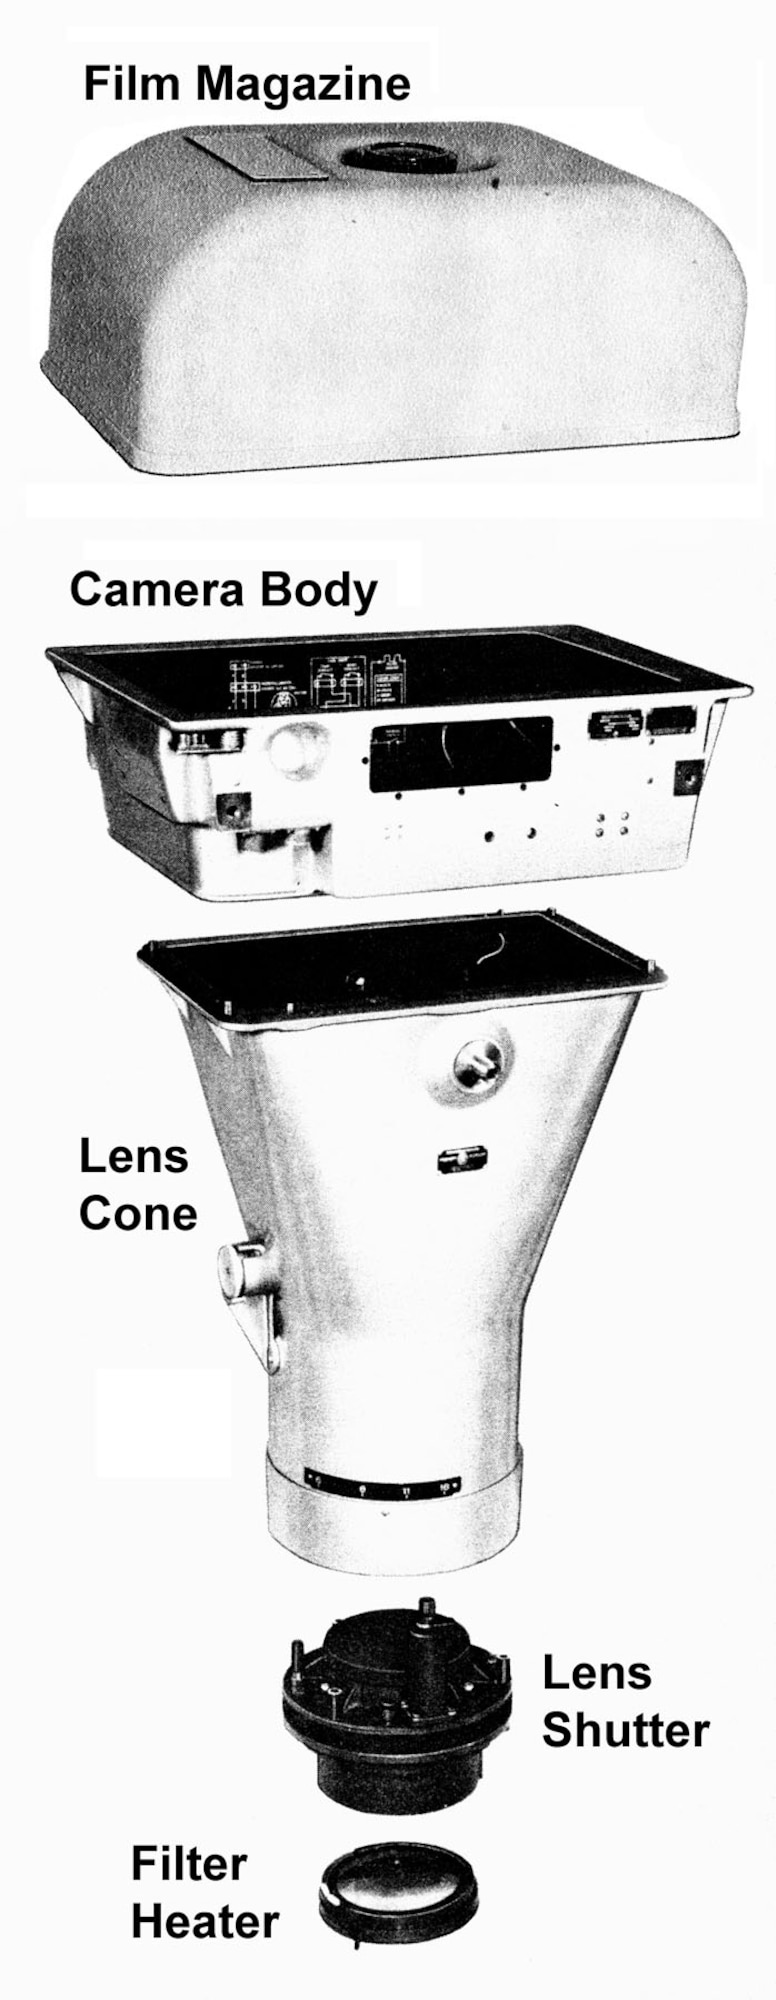 Composite image showing elements of cameras similar to the A-2 set. The film rolls are stored in the magazine above the camera body, which contains motors and other electronics. The film is advanced and exposed in the camera body. The lens cone holds the lens, shutters and heating elements the proper distance from the film for correct focus. The U-2 used three of these cameras at different angles. (U.S. Air Force photo)